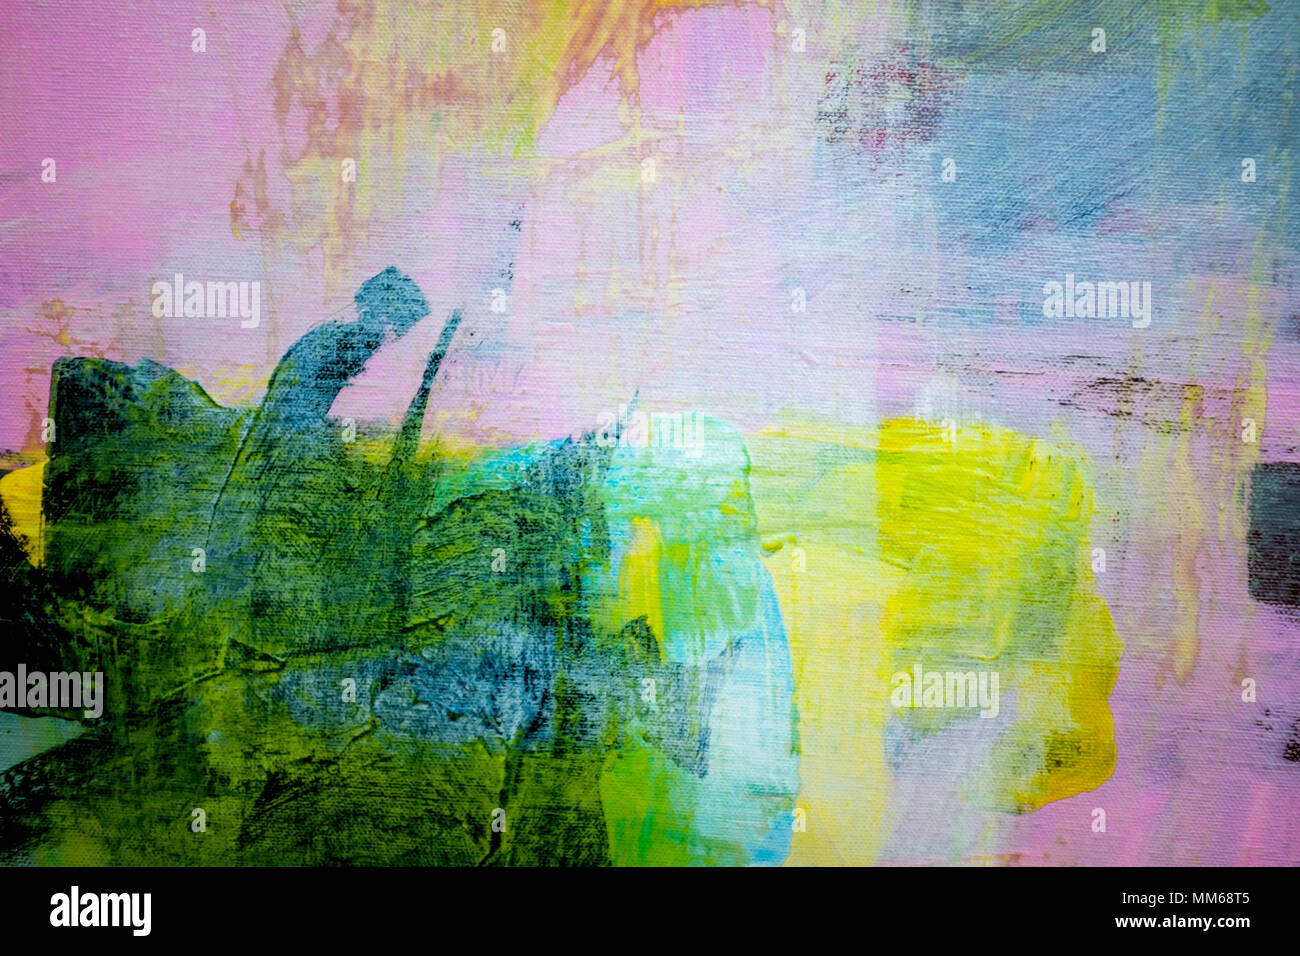 Abstract artwork- Acrylic canvas painting Stock Photo